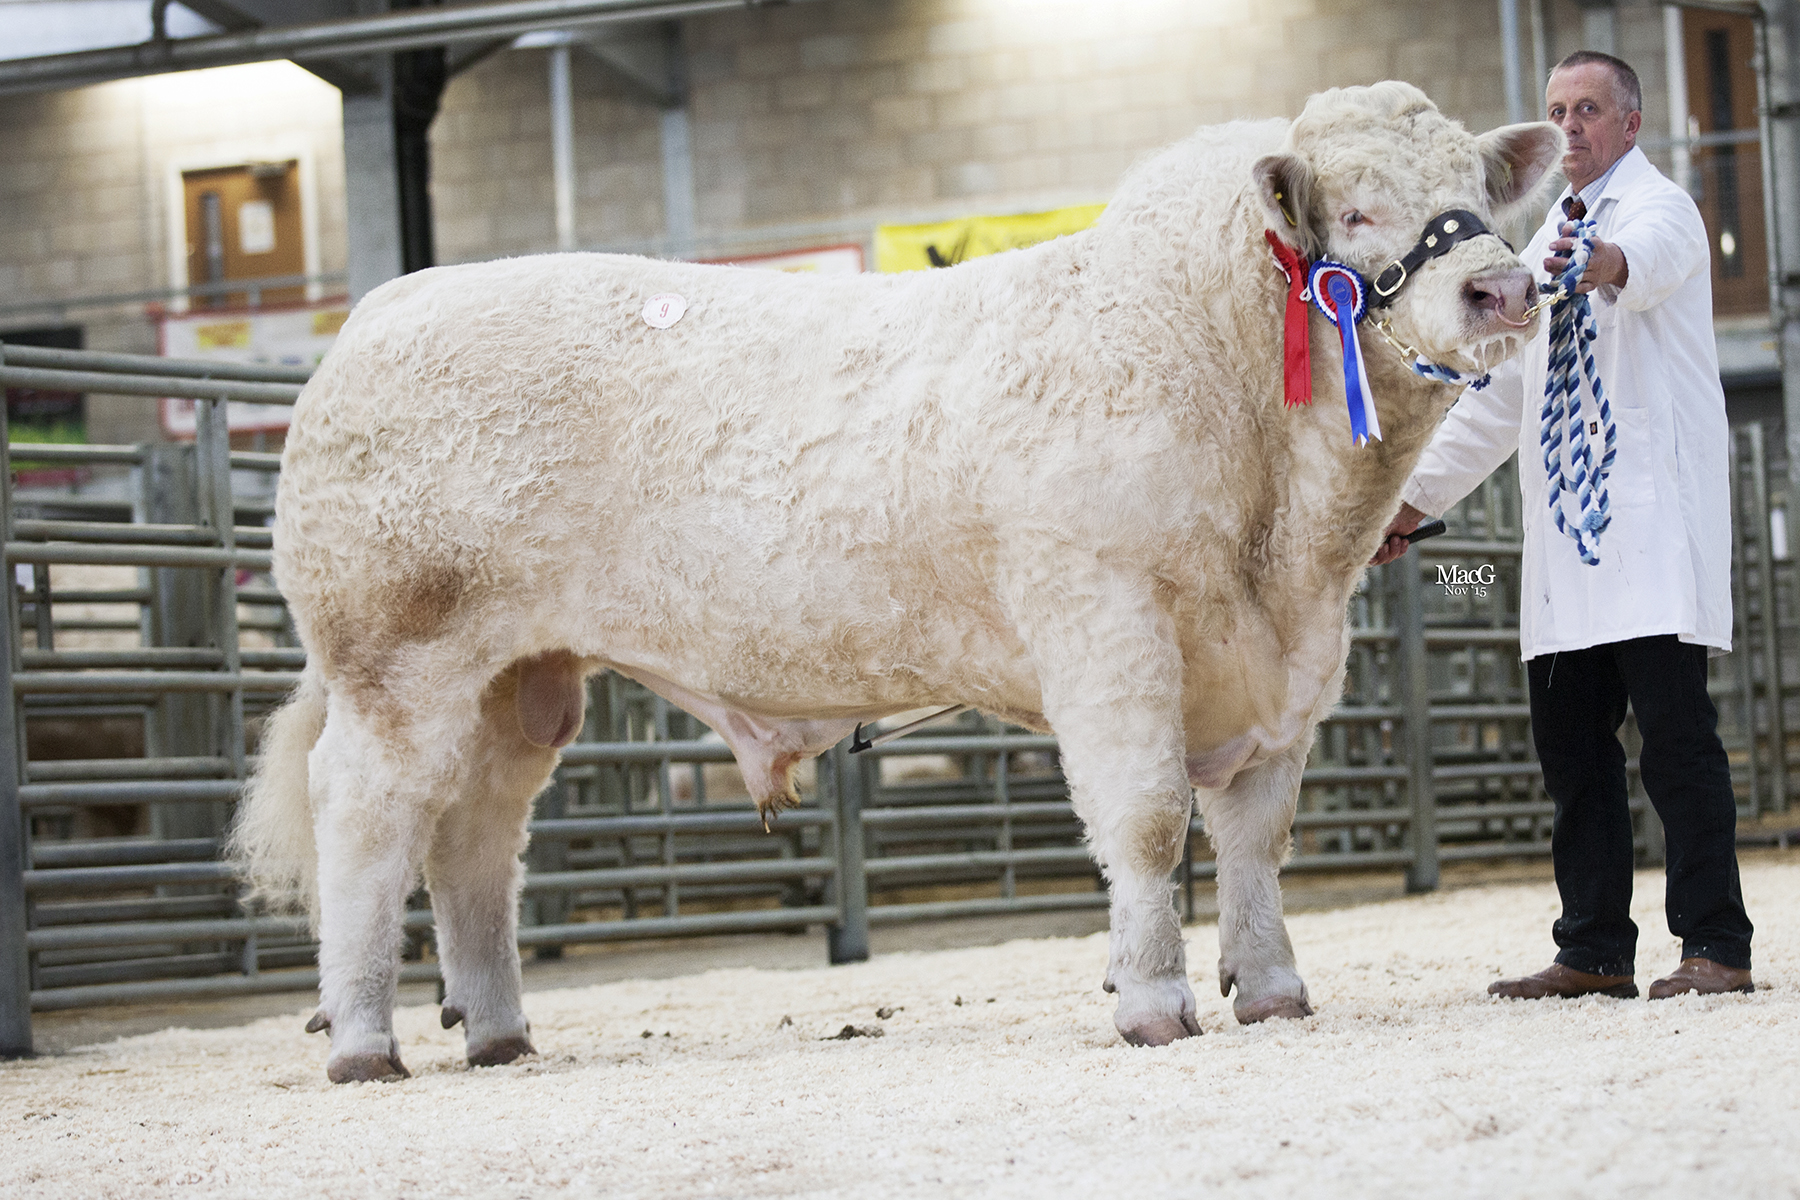 The reserve champion Esgob Jeep made 3,200gns